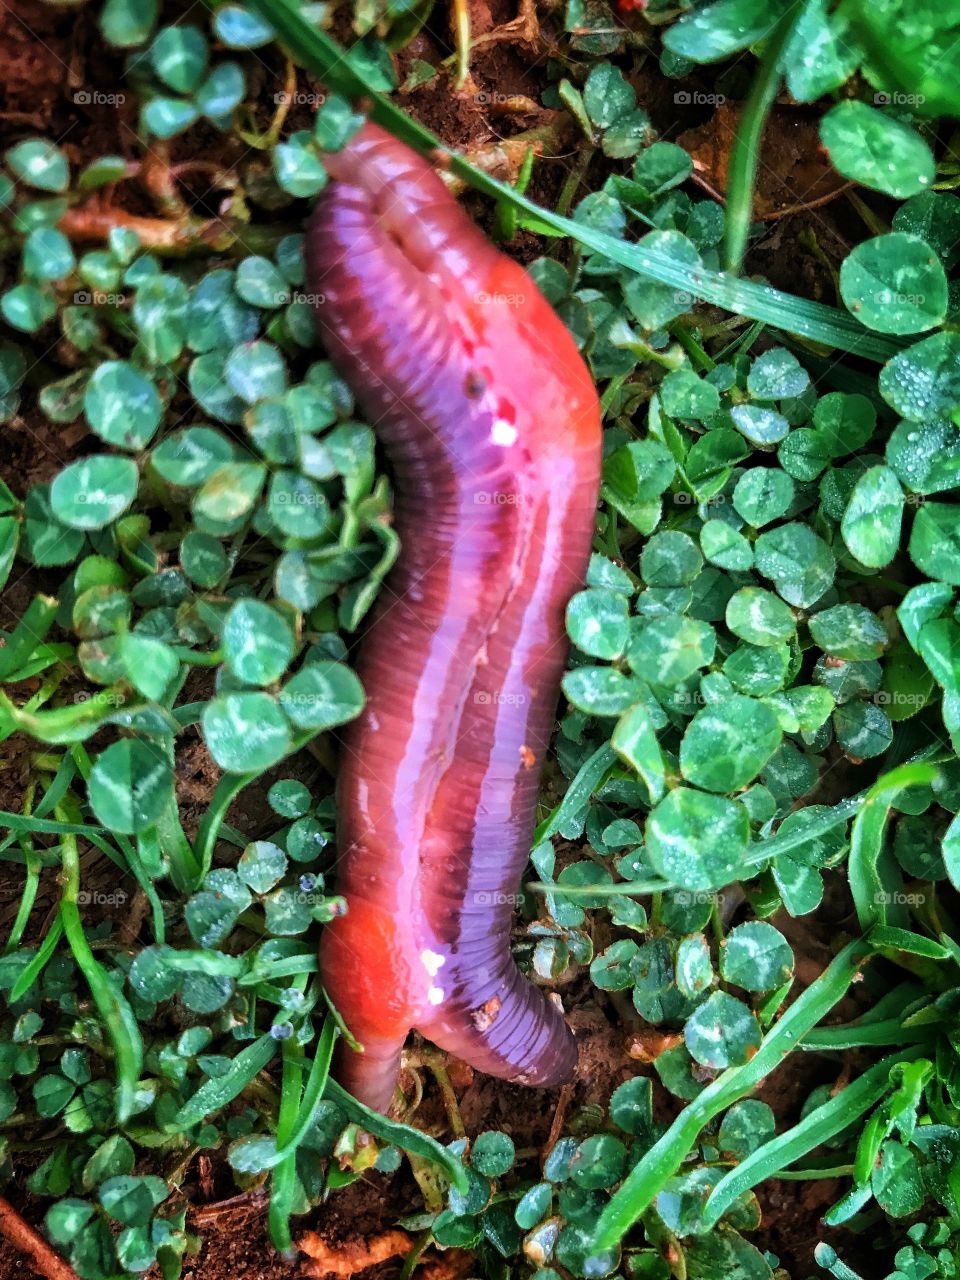 Just two big red juicy earthworms copulating in lush green clovers in order to make babies. 